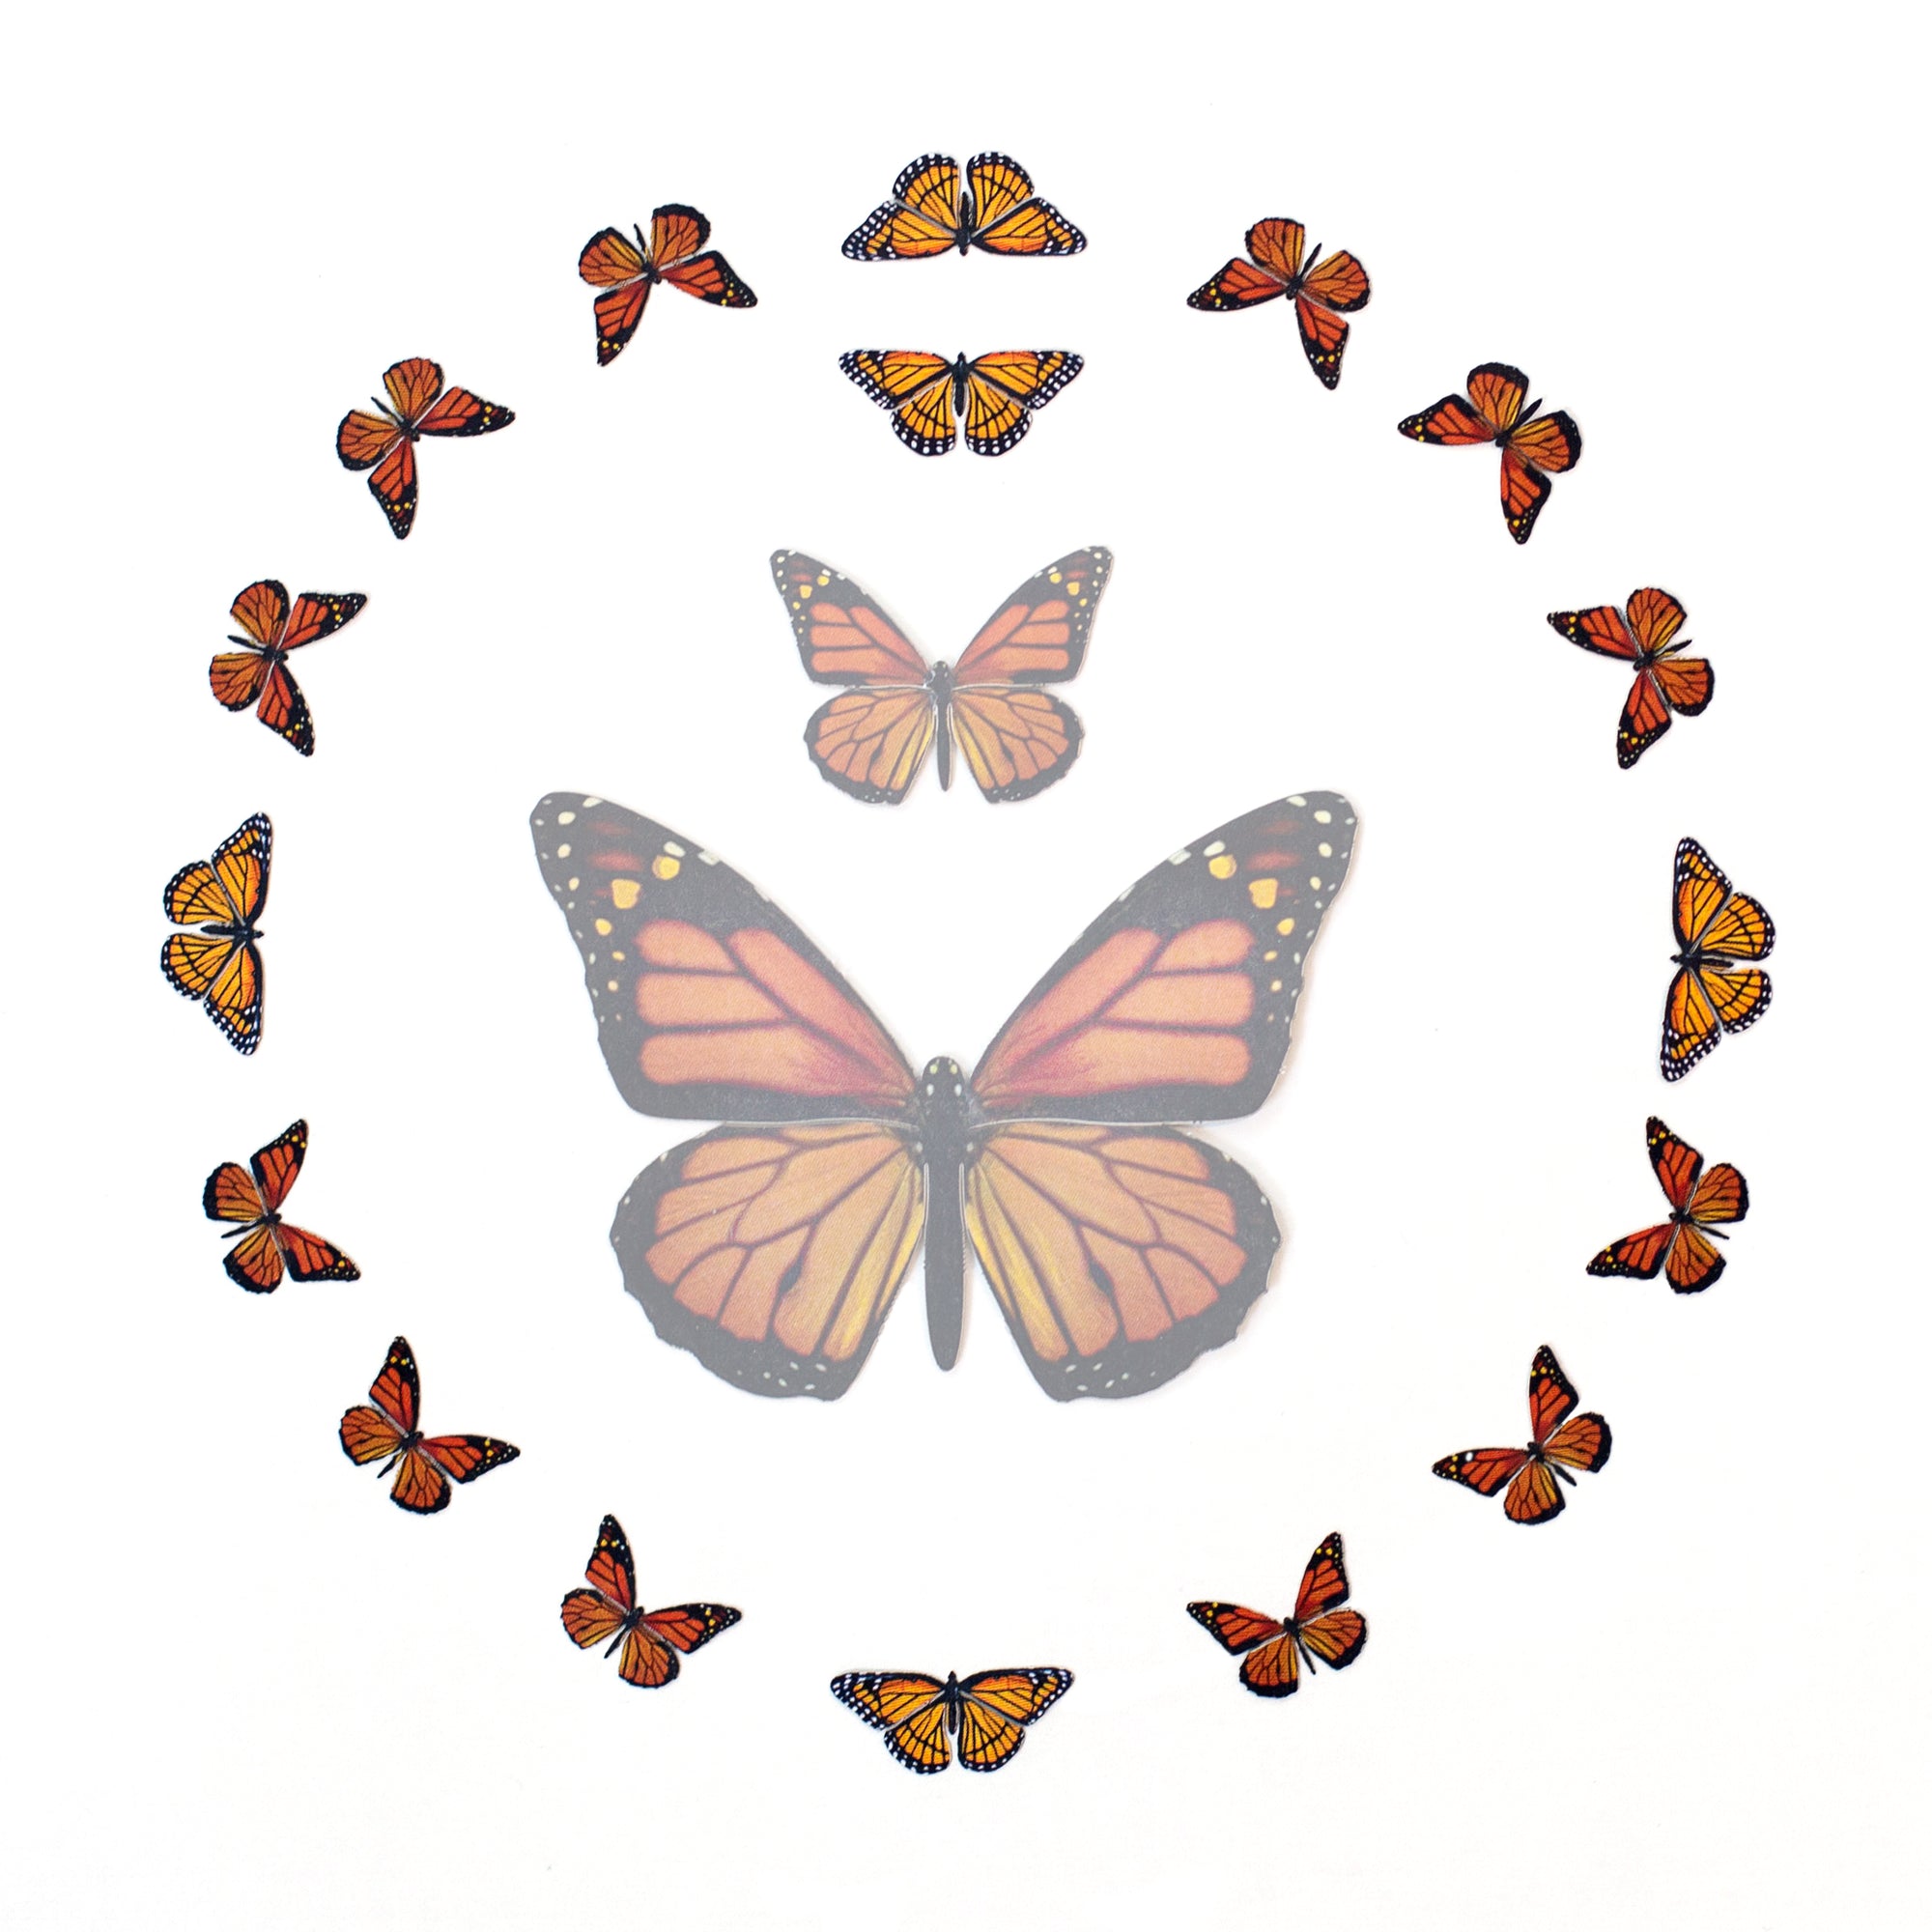 'Marmalade' Micro Monarch Butterfly Collection